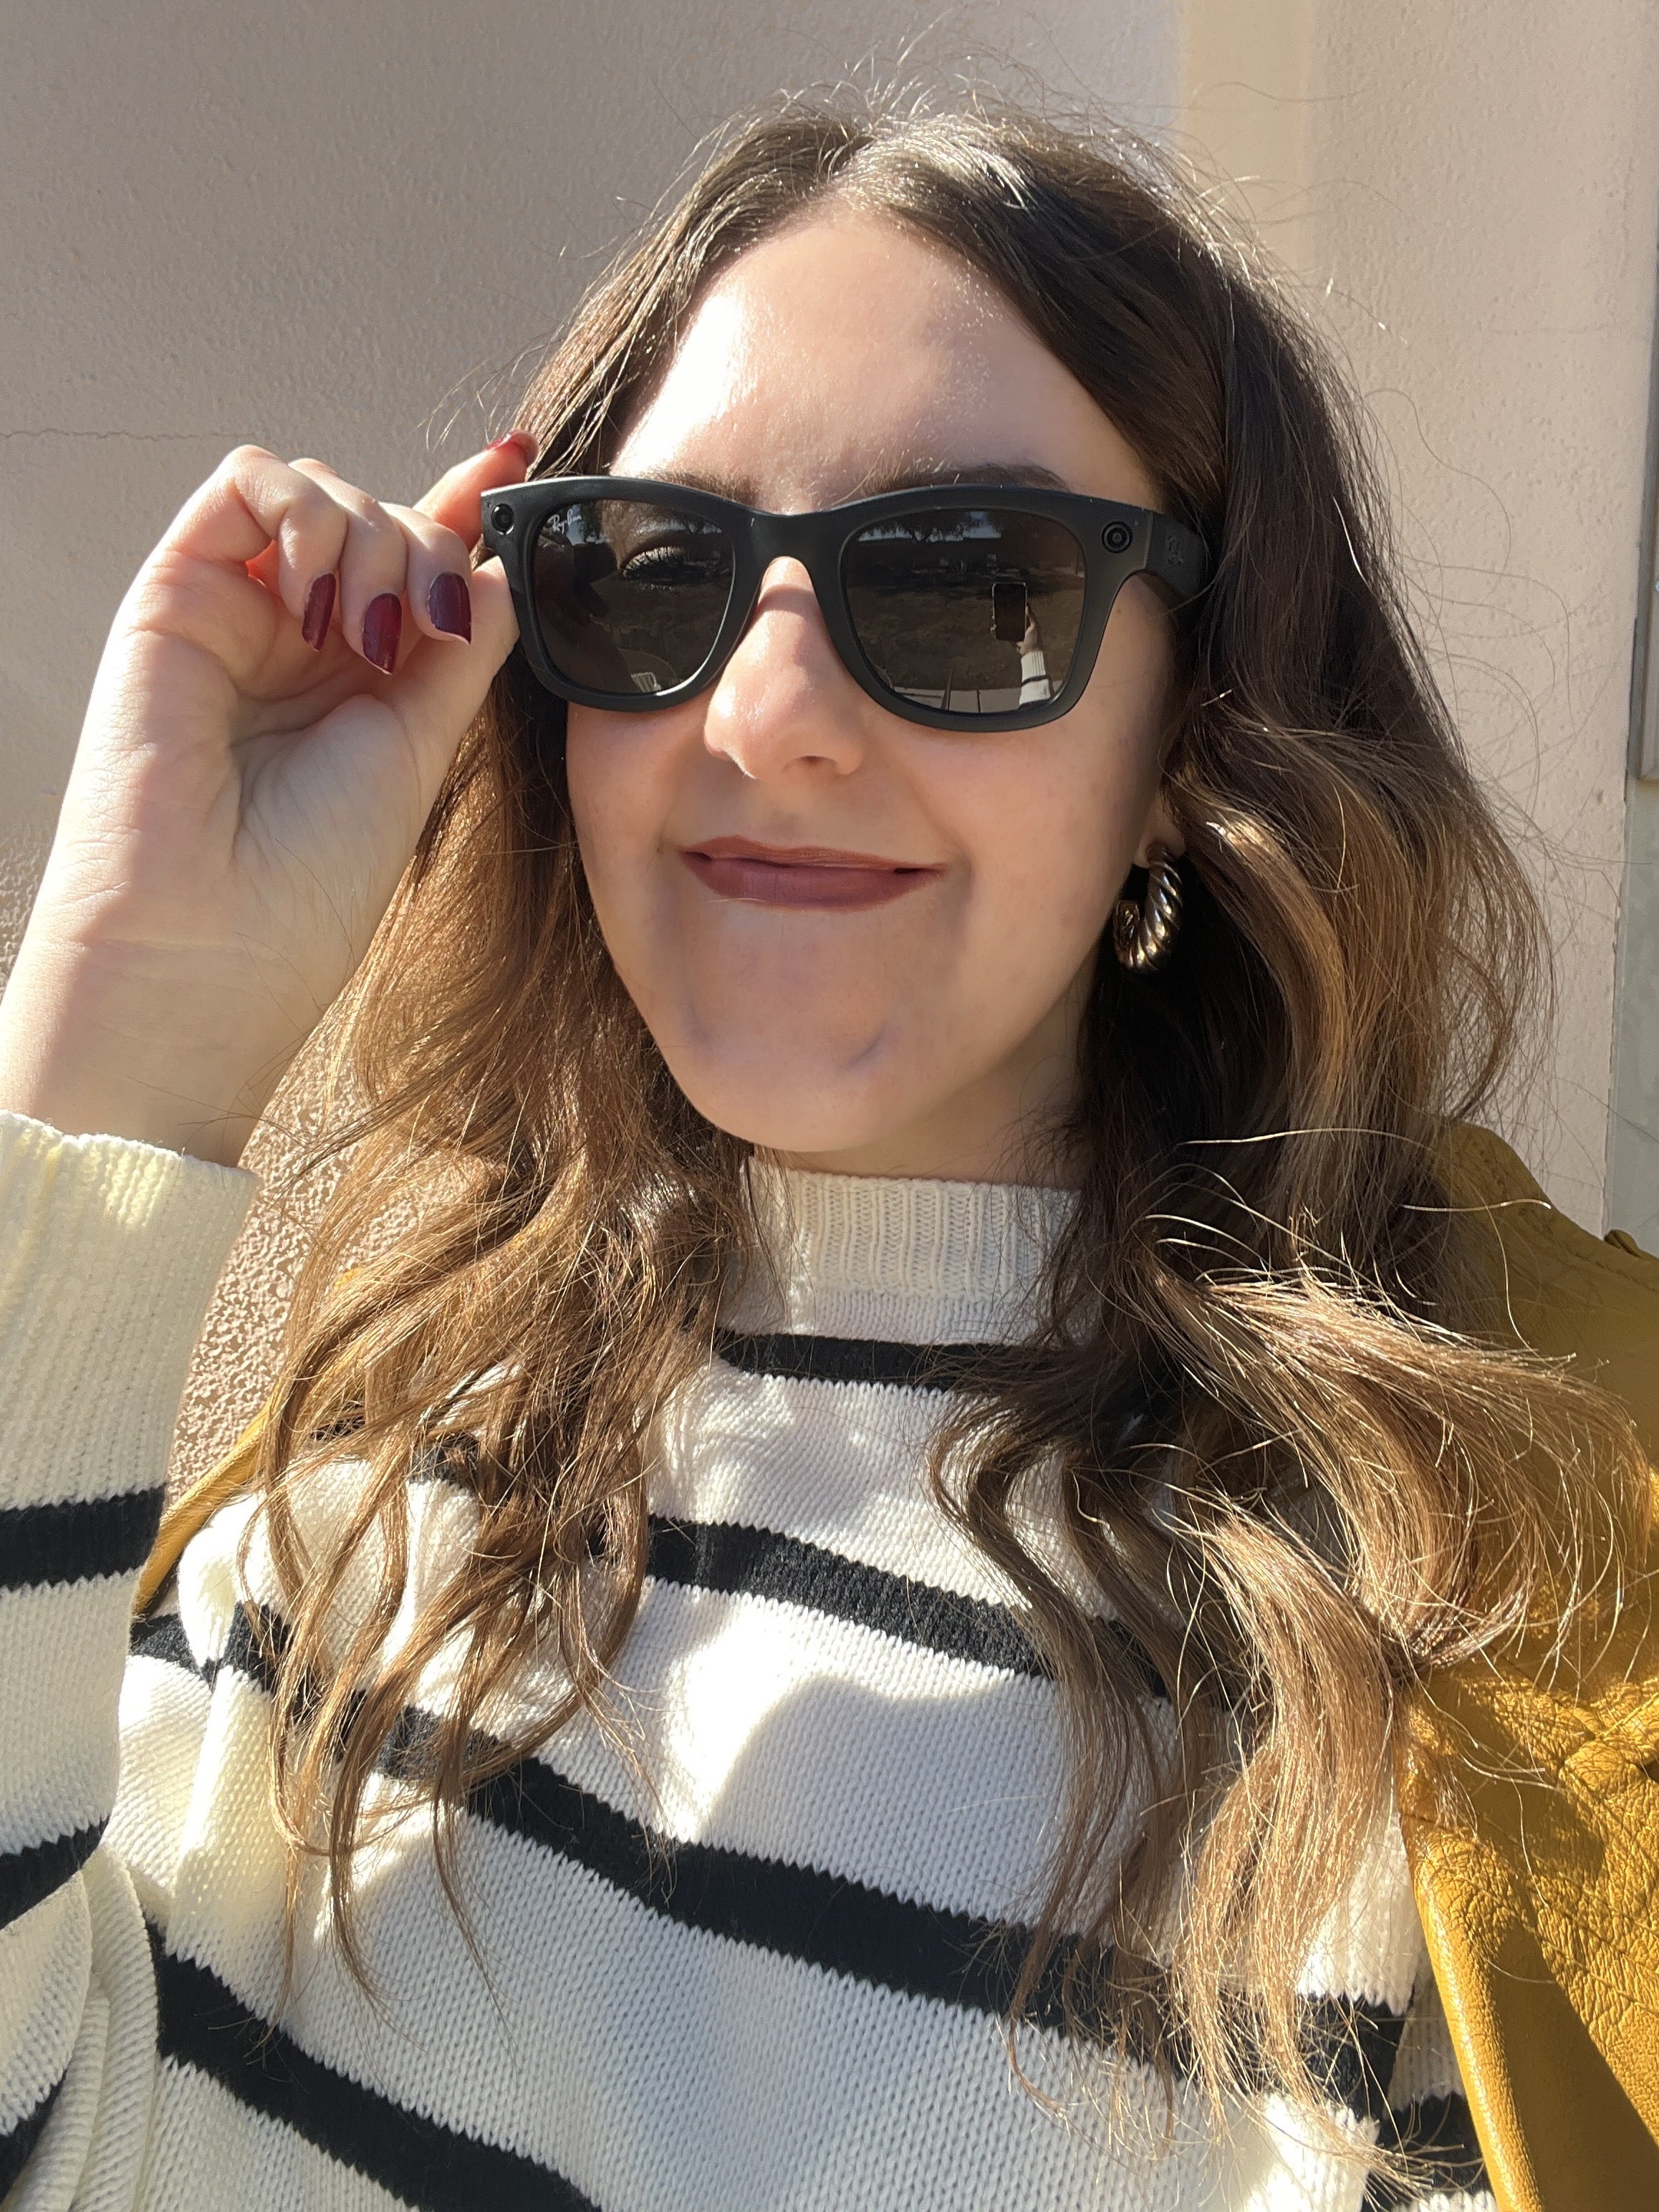 Ray-Ban Stories Smart Glasses Review With Photos | POPSUGAR Fashion